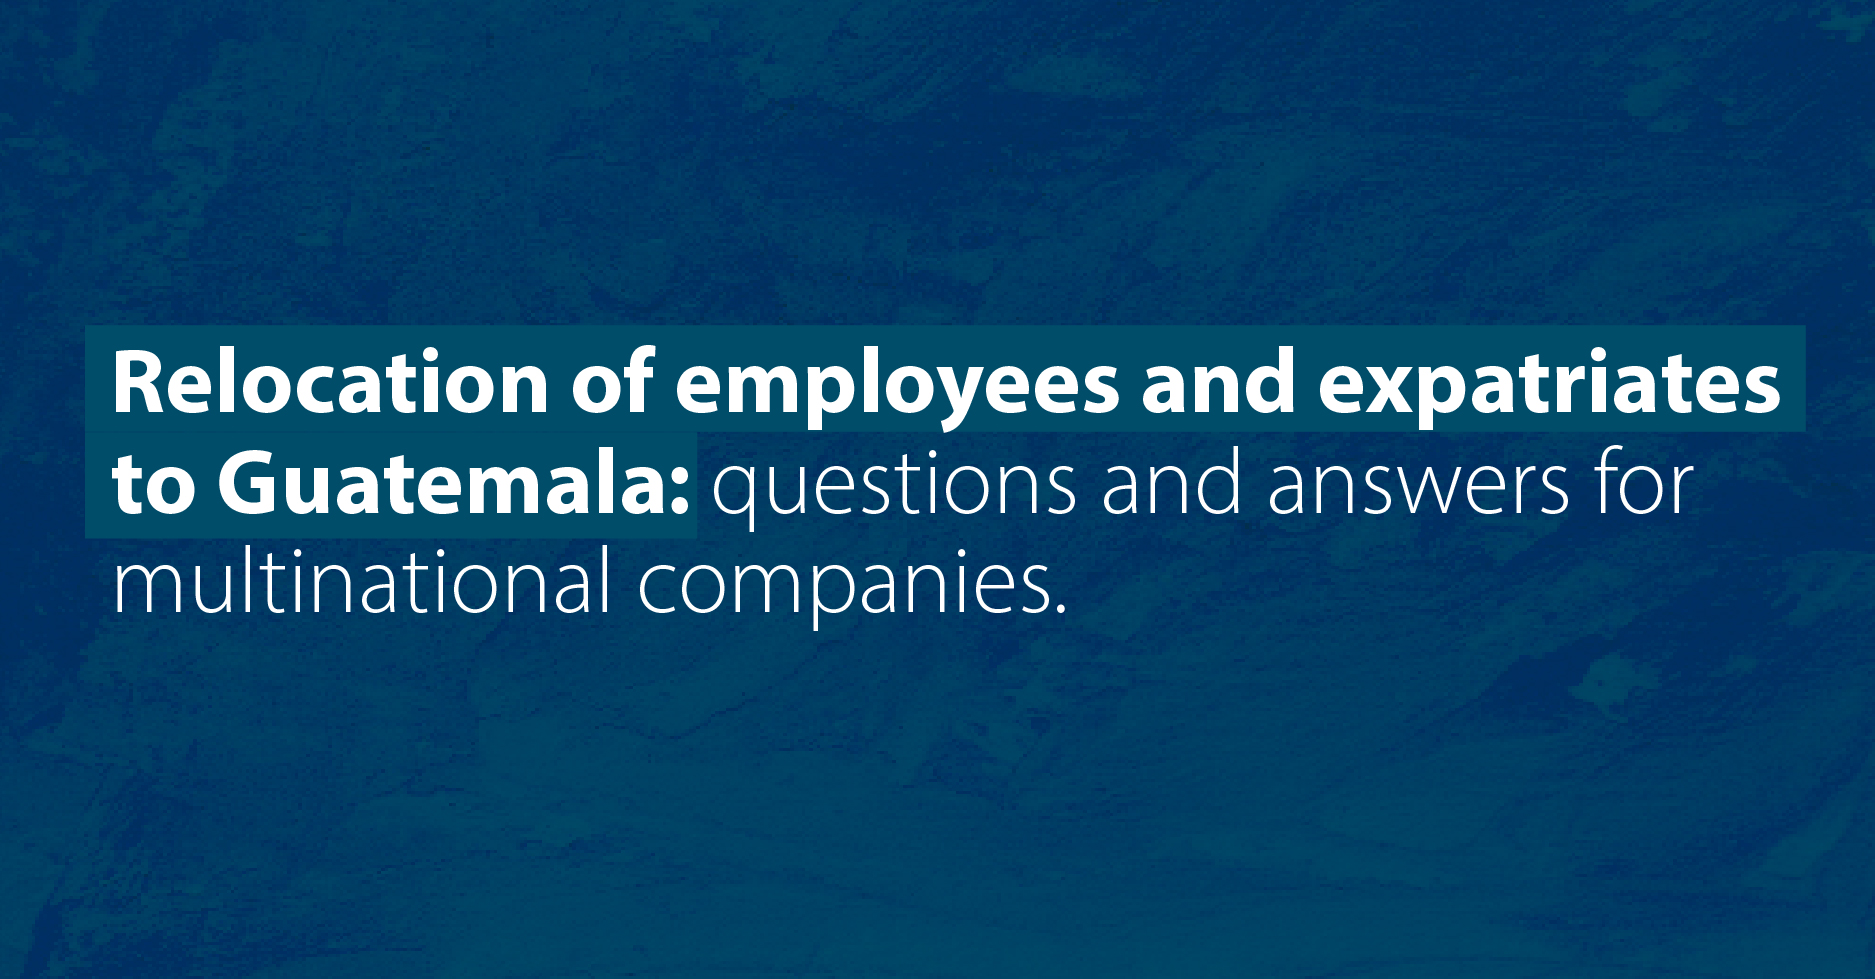 Relocation of employees and expatriates to Guatemala: questions and answers for multinational companies